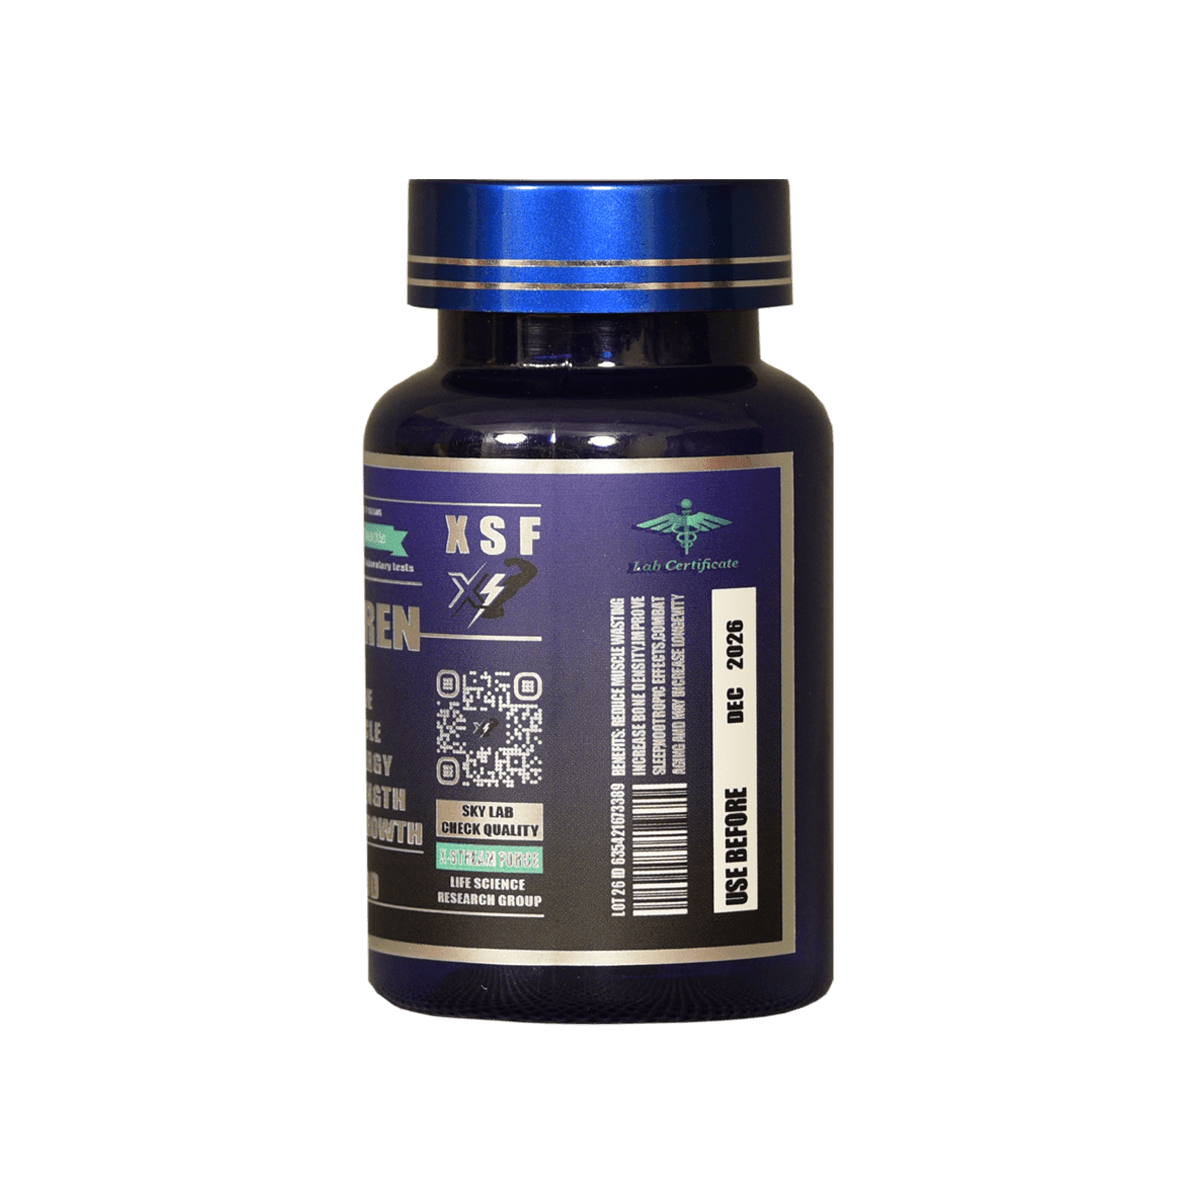 ibutamoren-mk677-capsules-sarm-900mg-muscle shop-xstreamforce-for recomp-rejuvenation-strength-volume-buy online✦mk677 sarms✦ fitness supplements | XSF Store